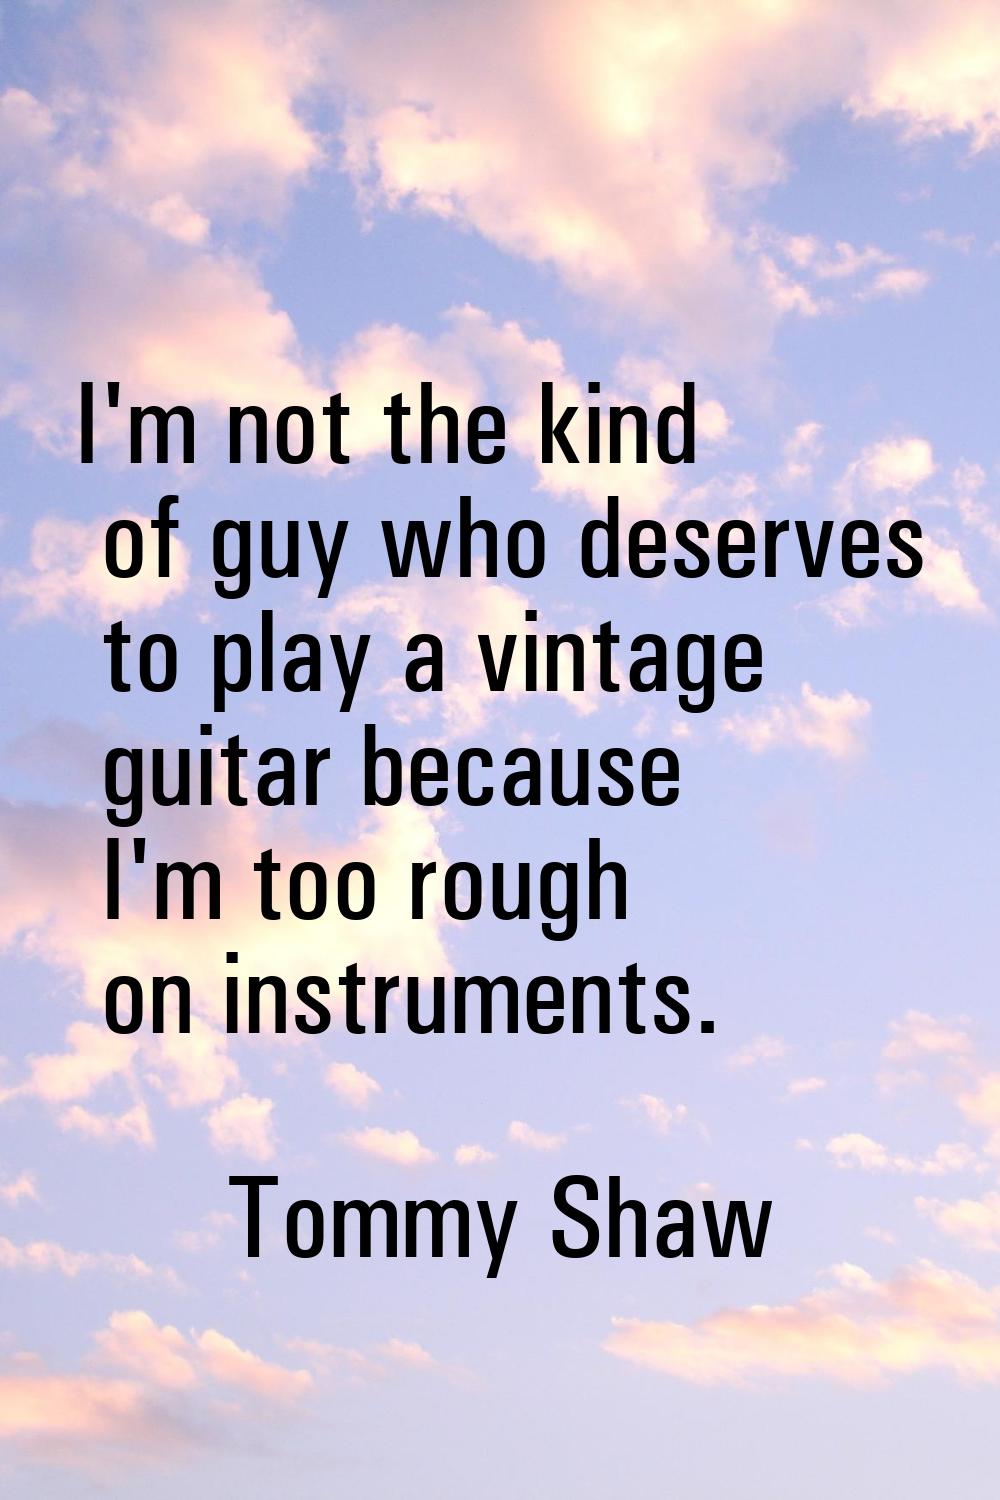 I'm not the kind of guy who deserves to play a vintage guitar because I'm too rough on instruments.